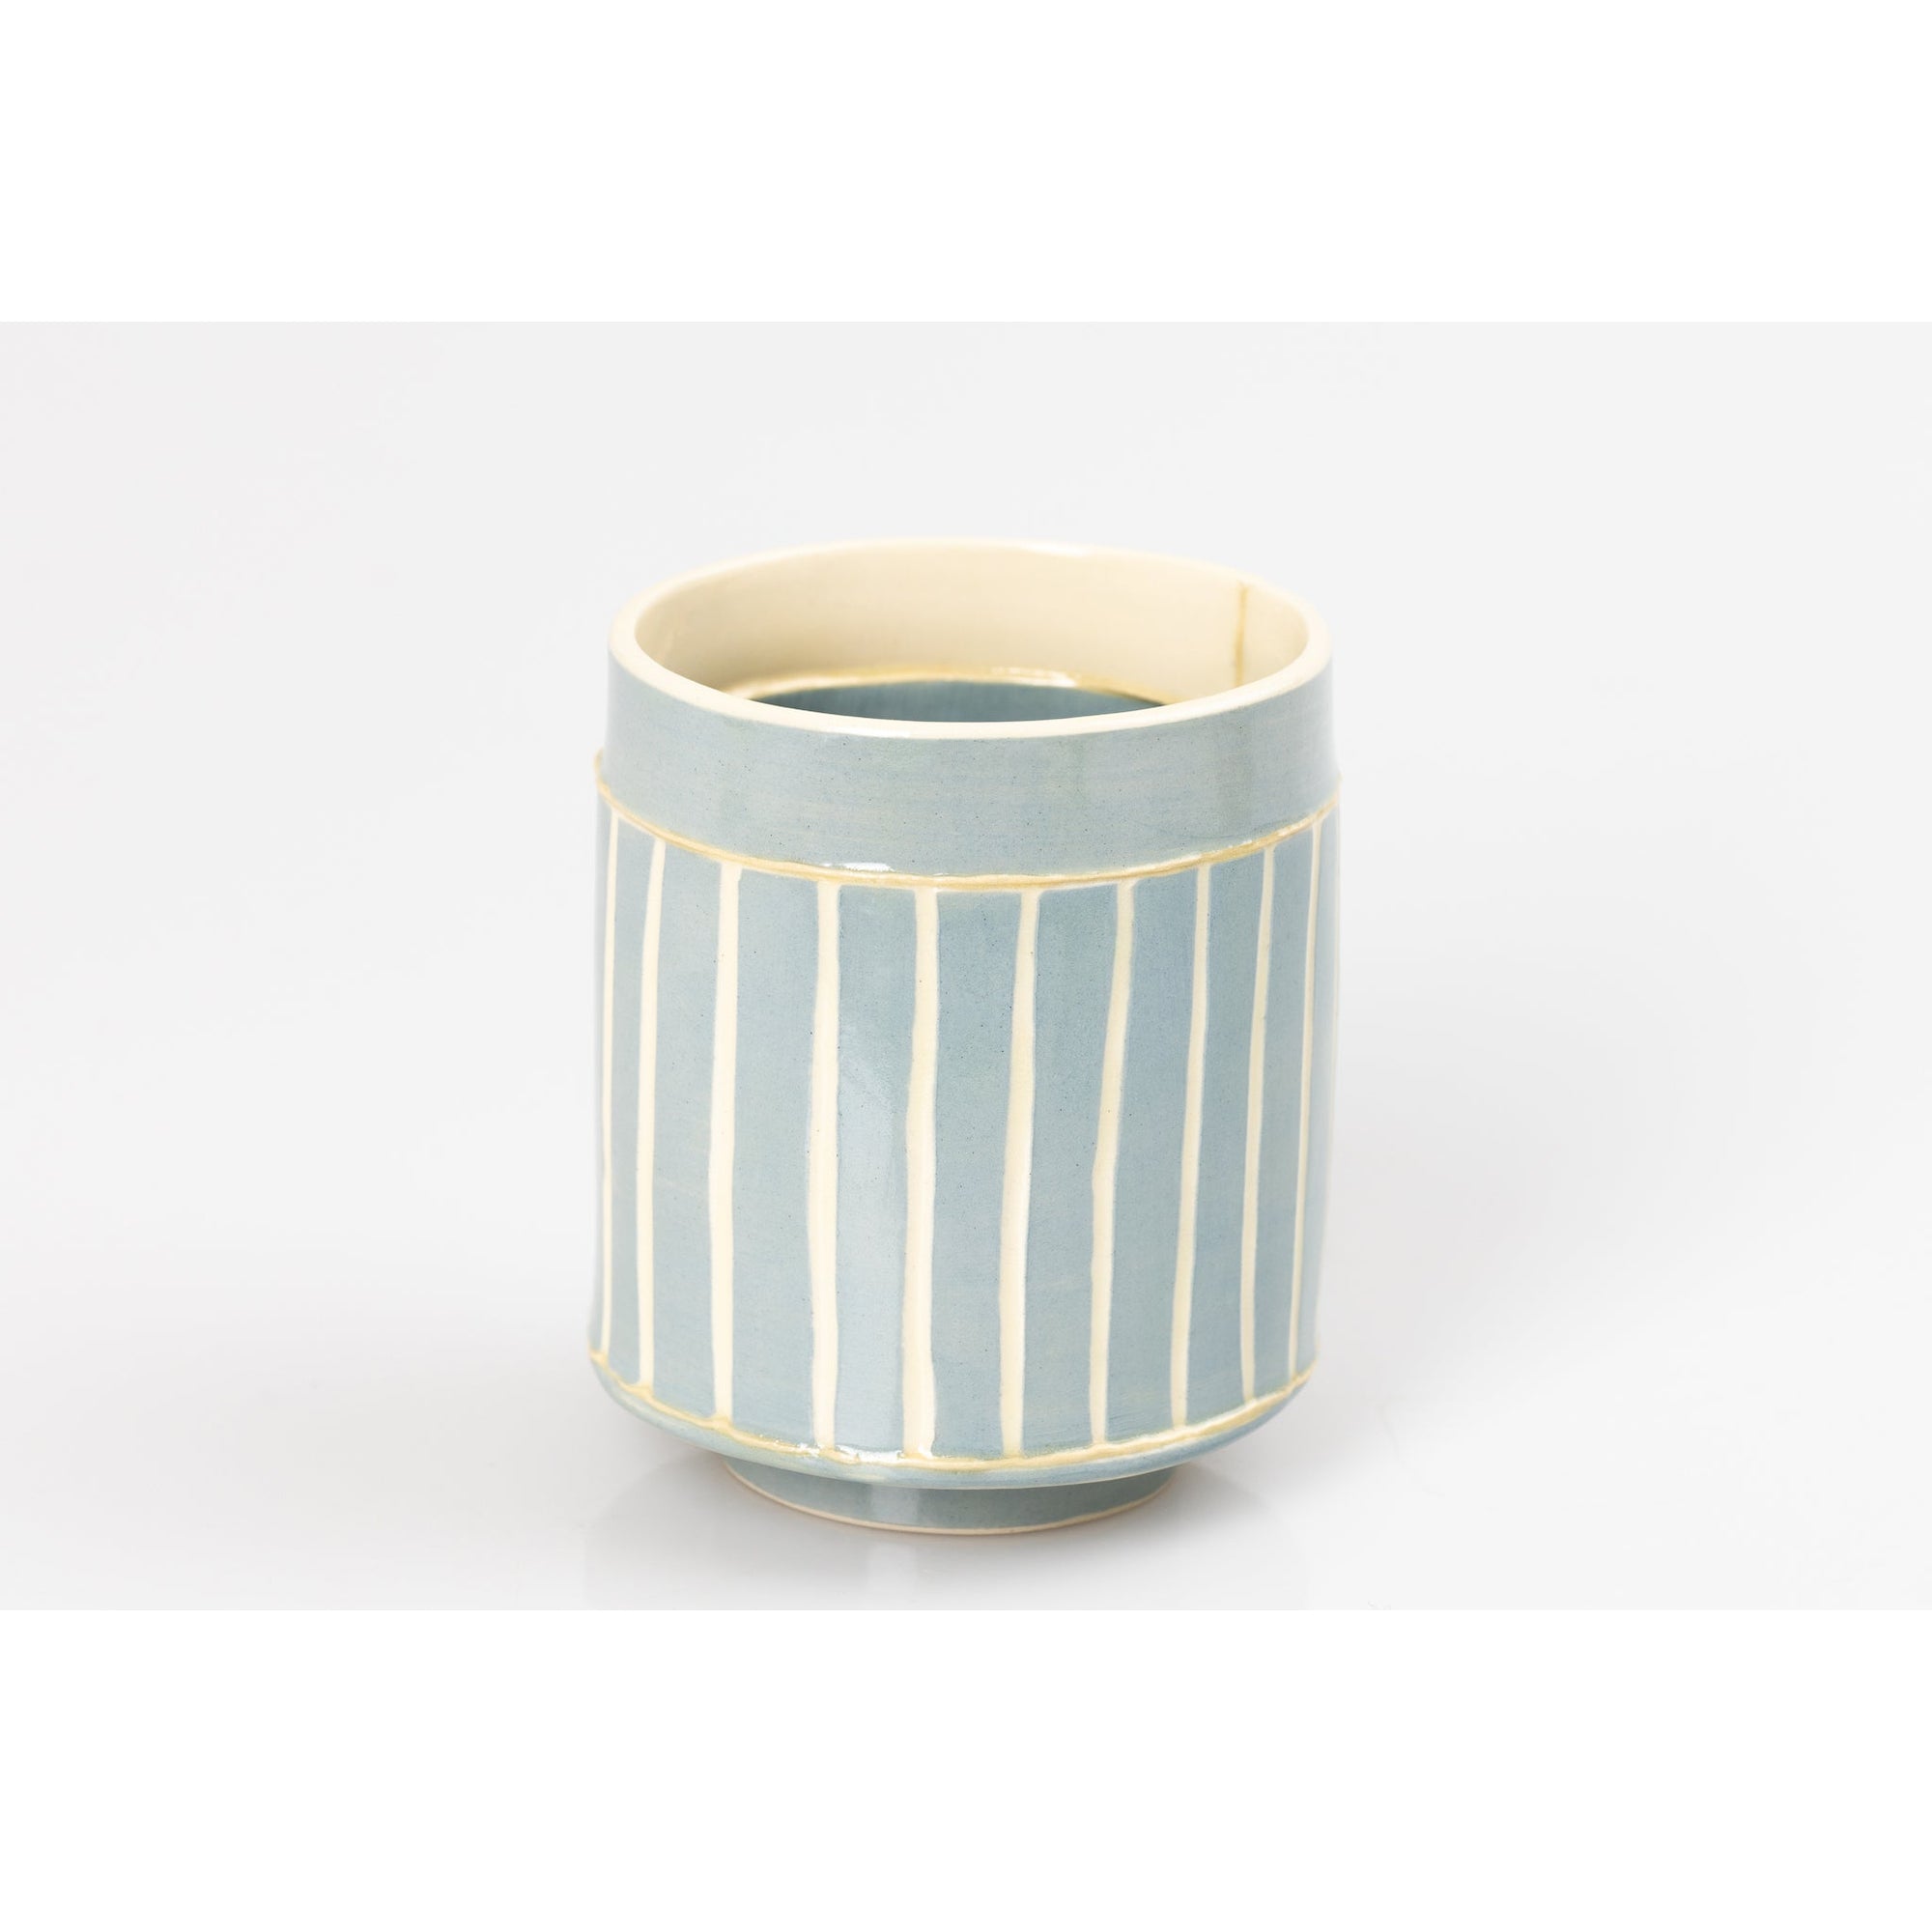 SV13 Small Vessel, handbuilt ceramic created by Emily-Kriste Wilcox, available from Padstow Gallery, Cornwall